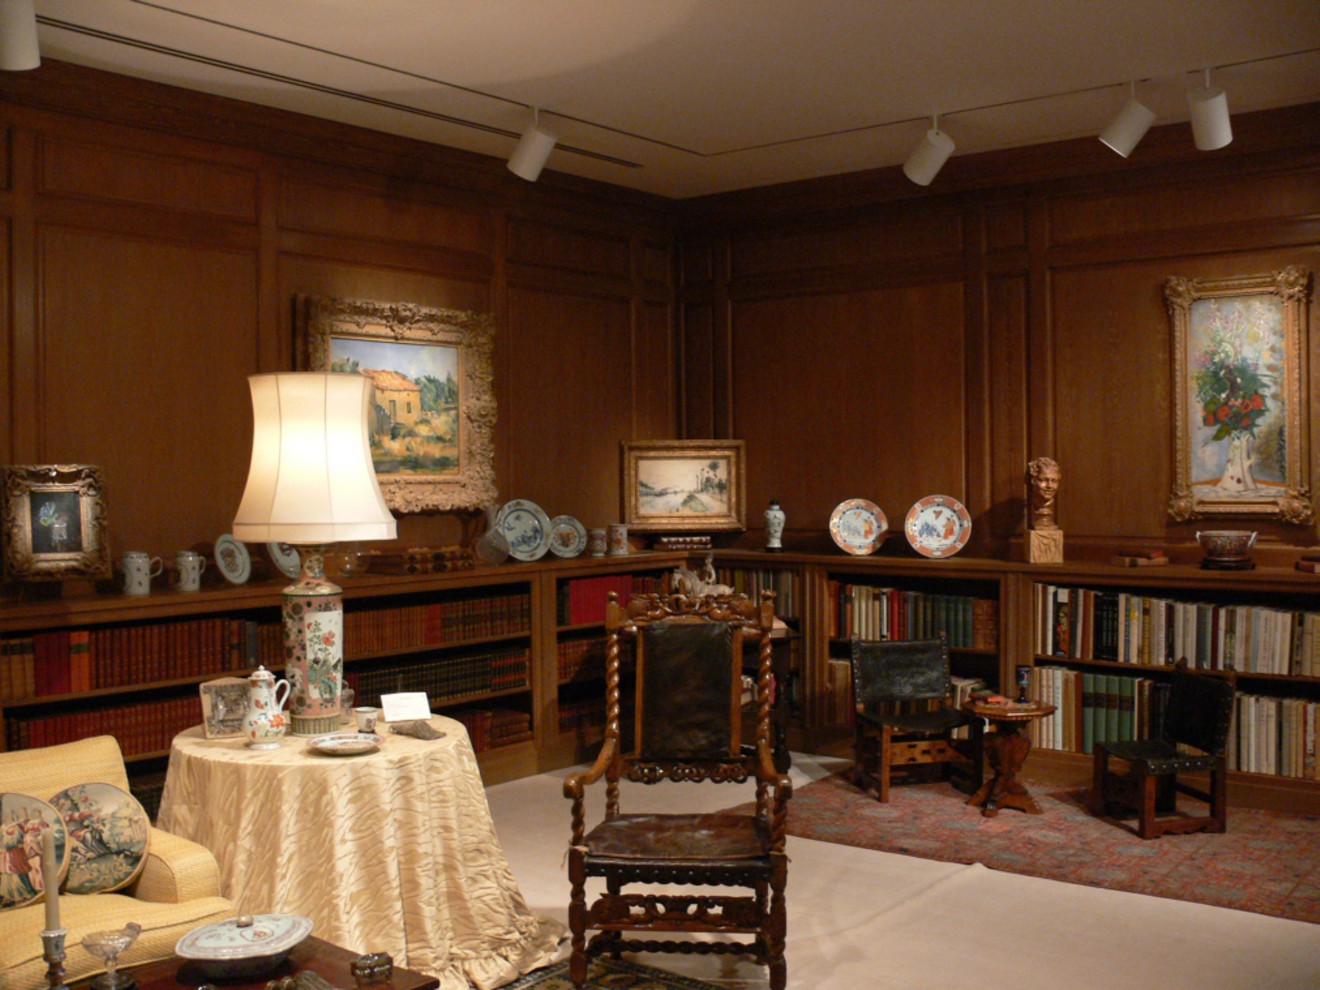 The Wendy and Emery Reves collection is also given as an example of museums’ eagerness to acquire; in 1985, the DMA reconstructed five rooms from the Reves’ home in France for its display, at Wendy Reves’ insistence.